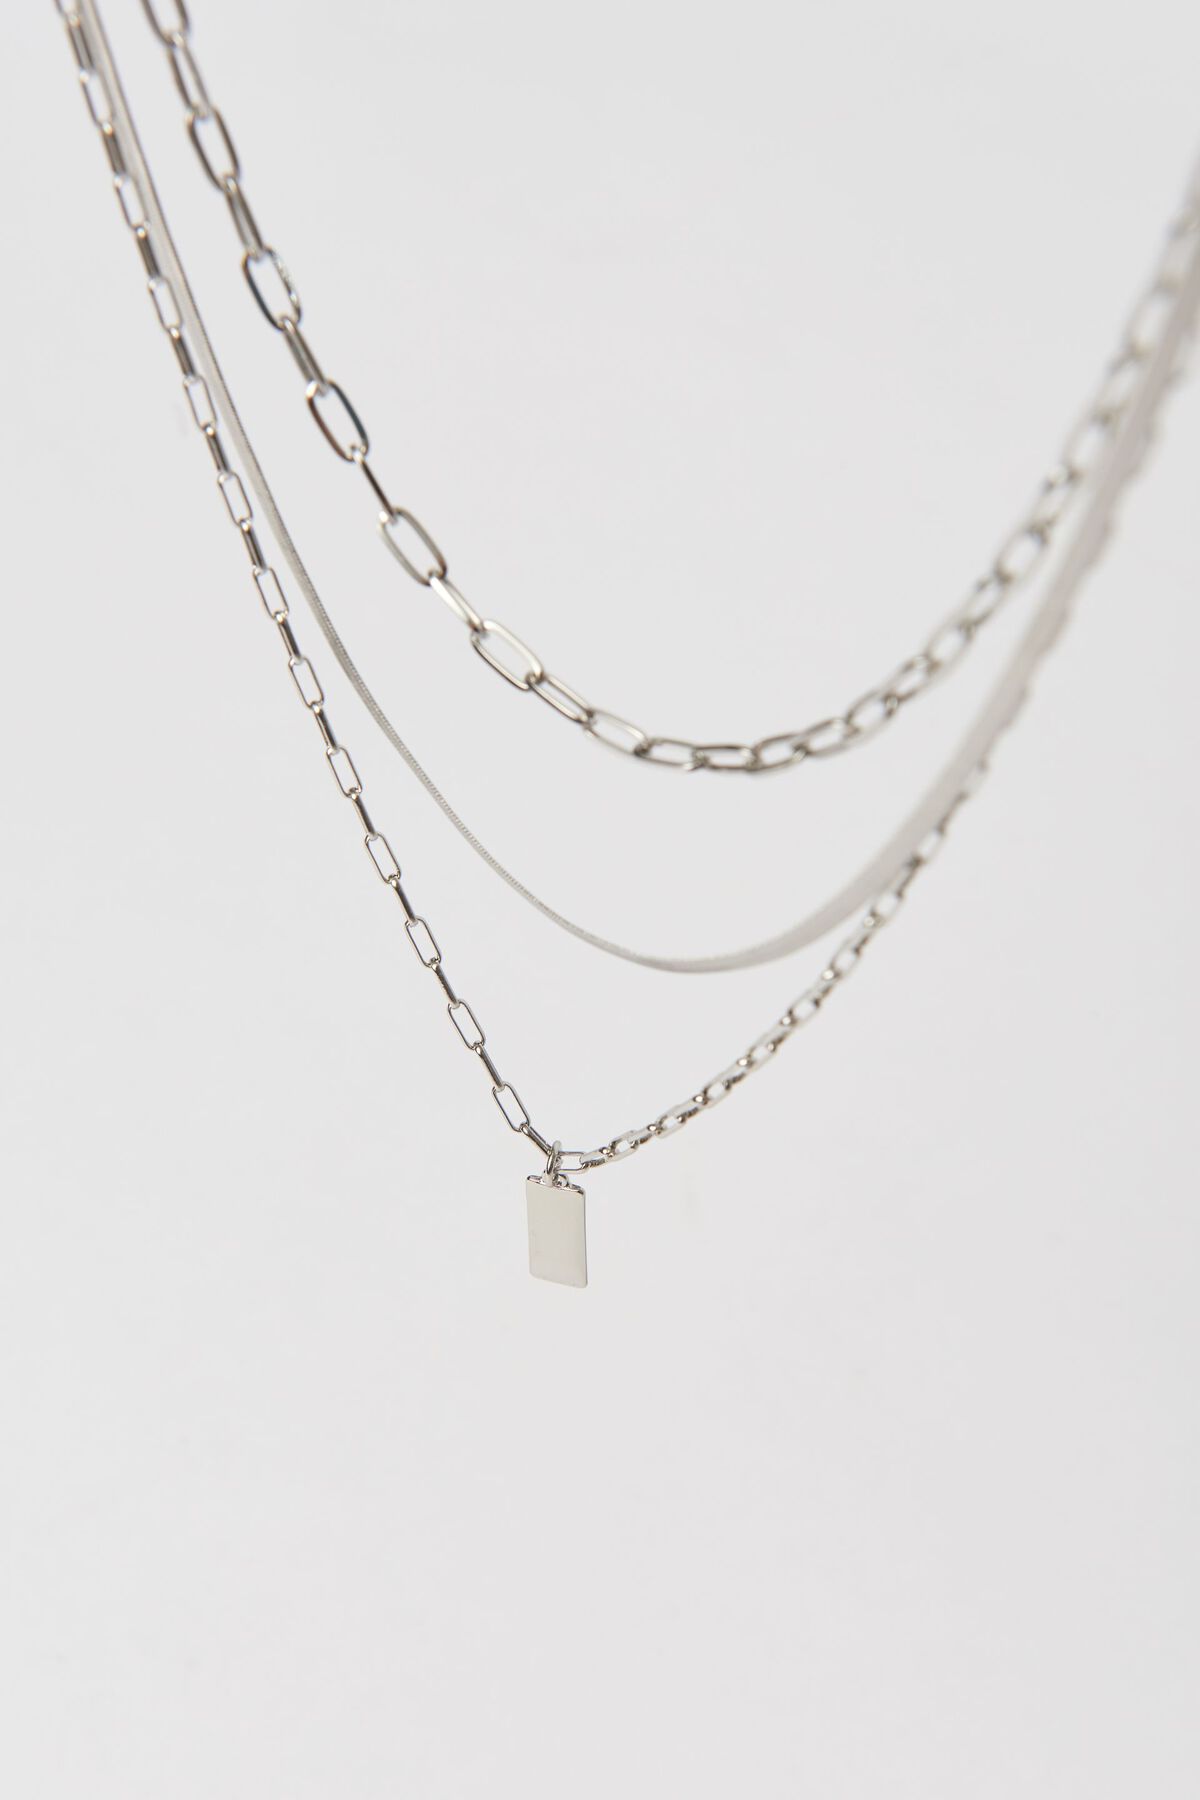 Garage Layered Paperclip & Pendant Necklace. 4